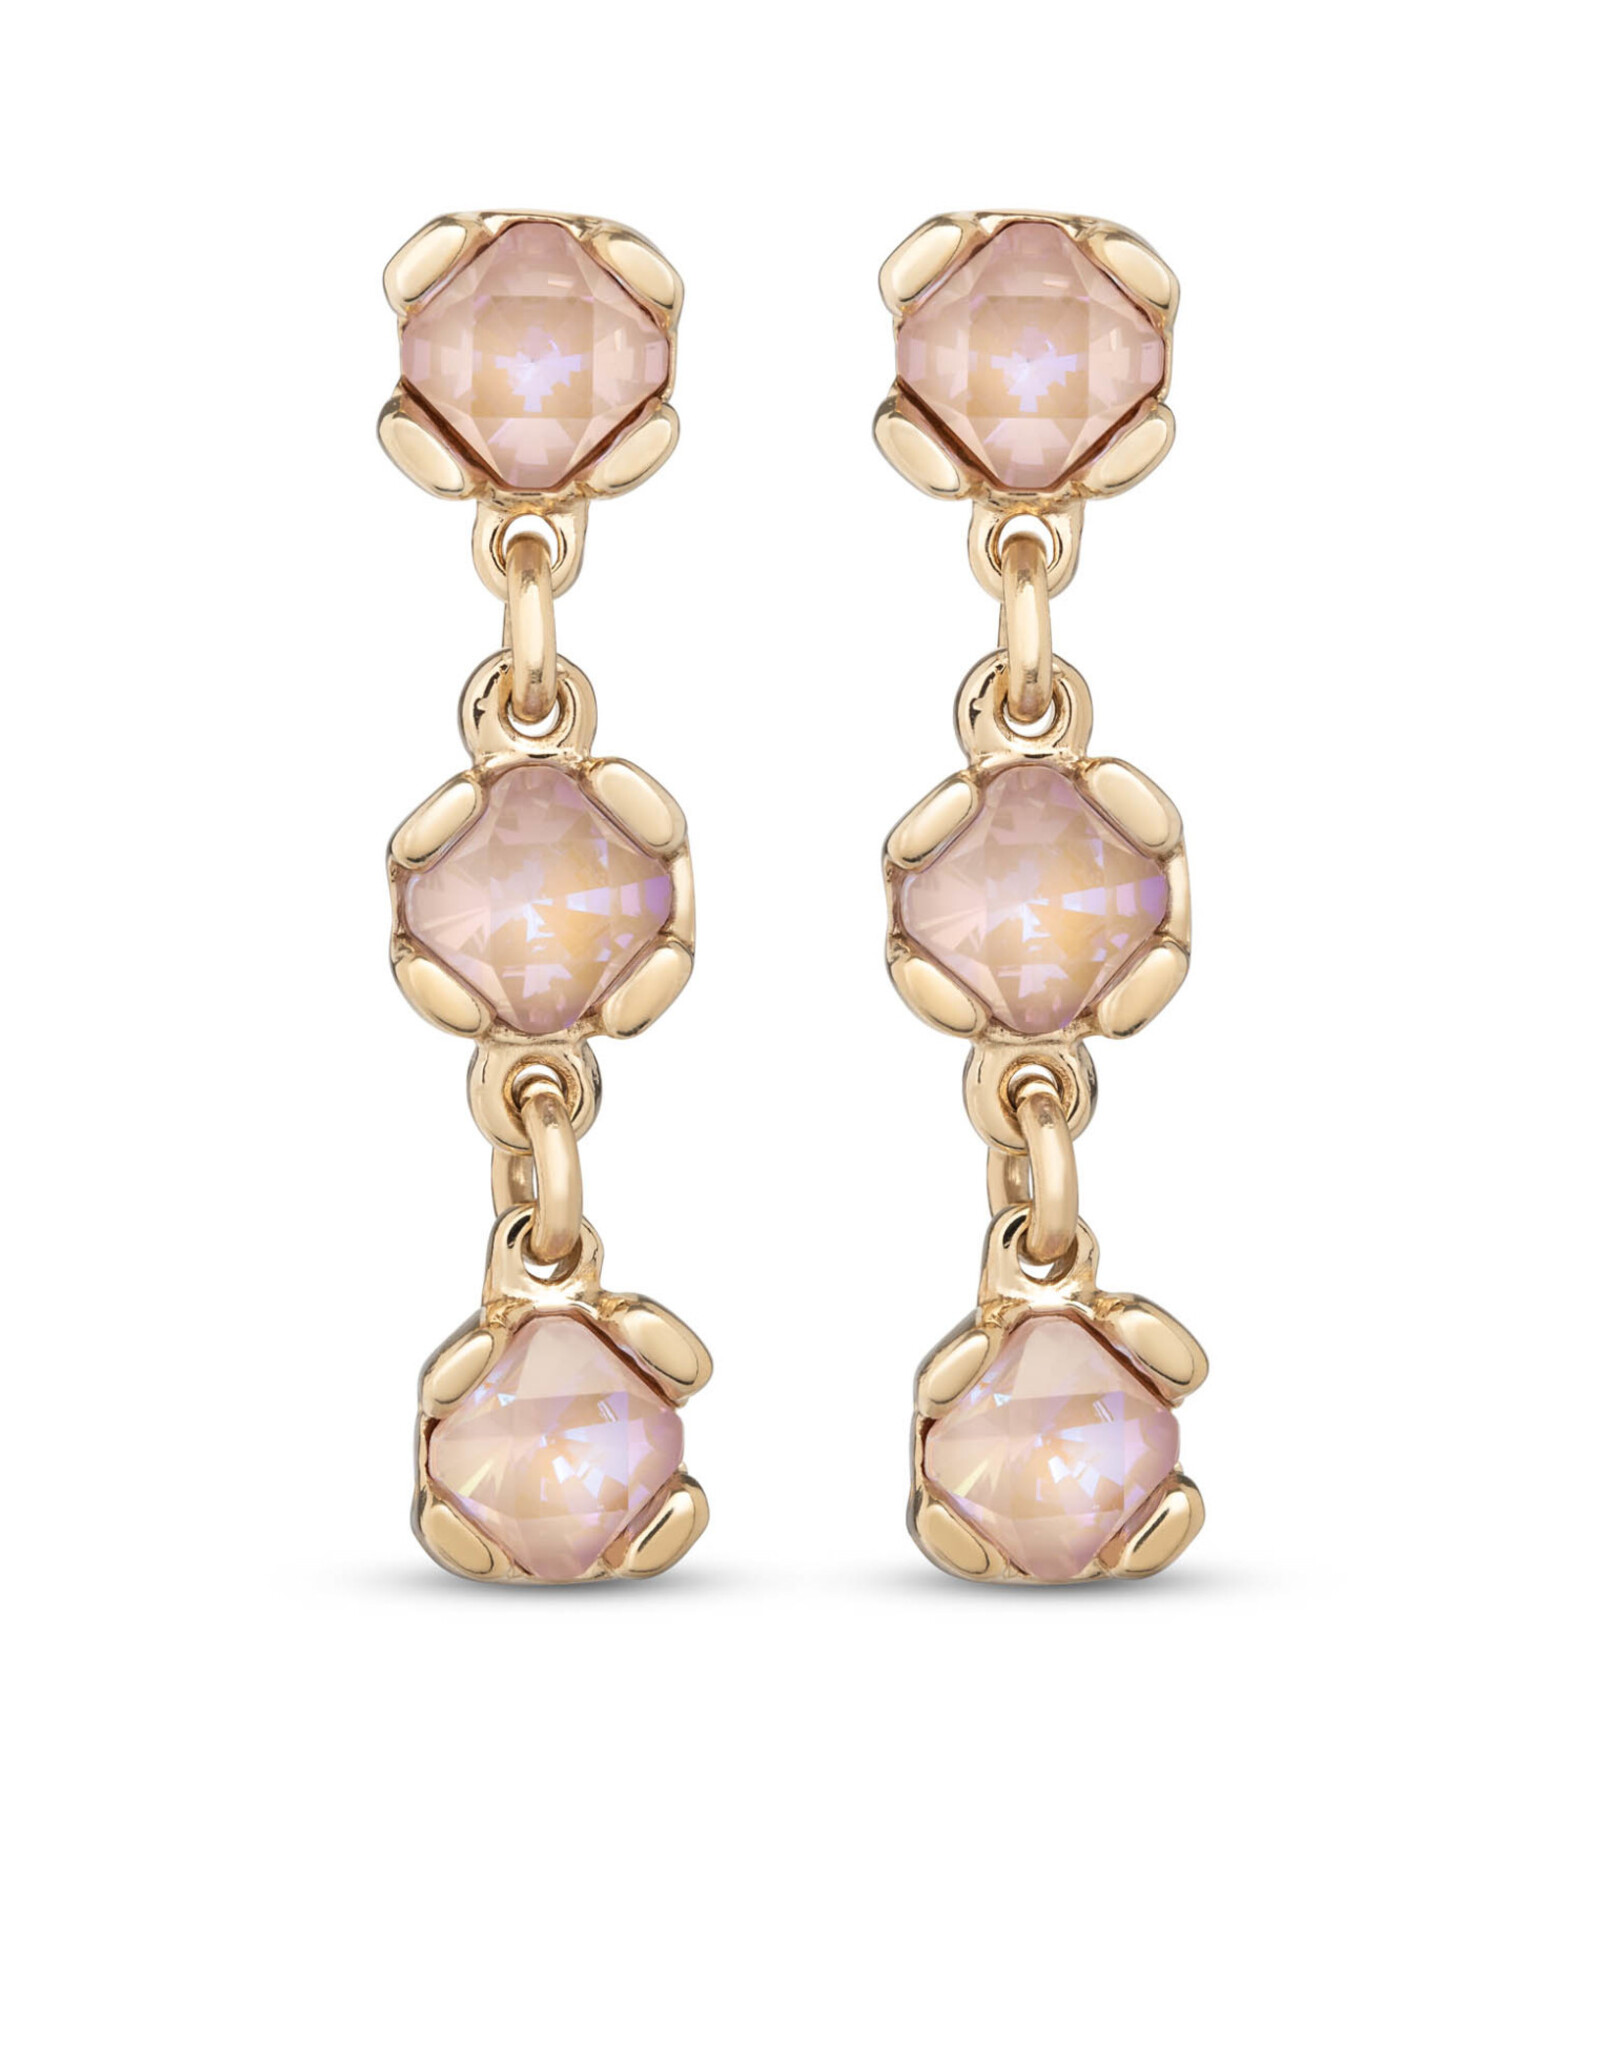 UNOde50 UNOde50 Sublime Pink Gold Earrings